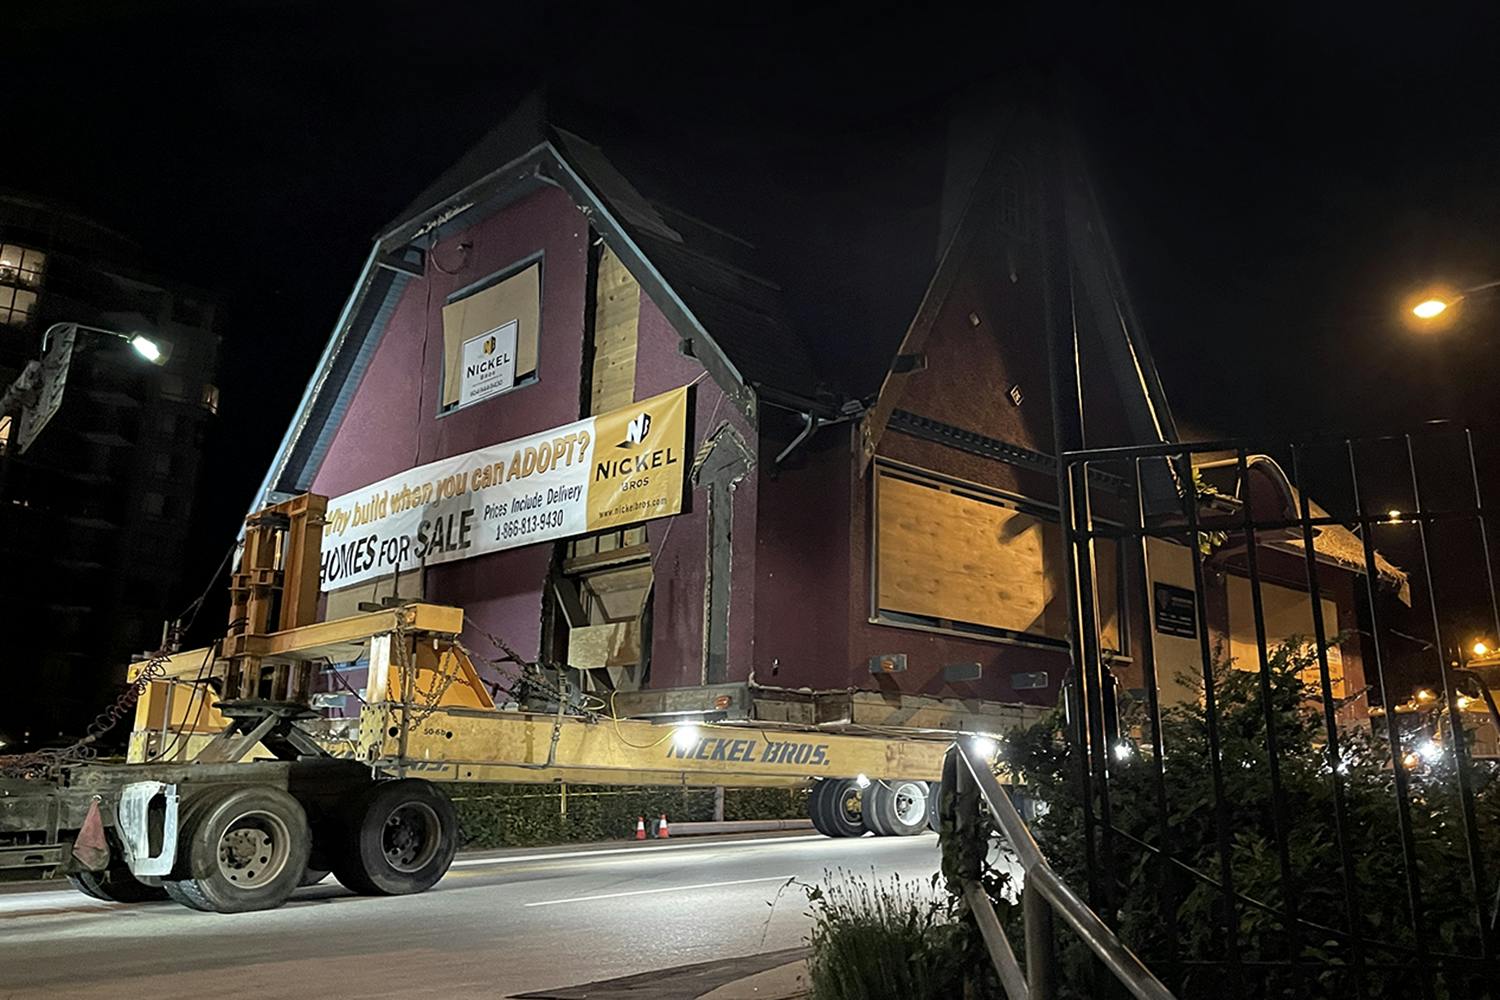 At night, a large burgundy wood-paneled house is loaded onto a large yellow trailer for relocation.